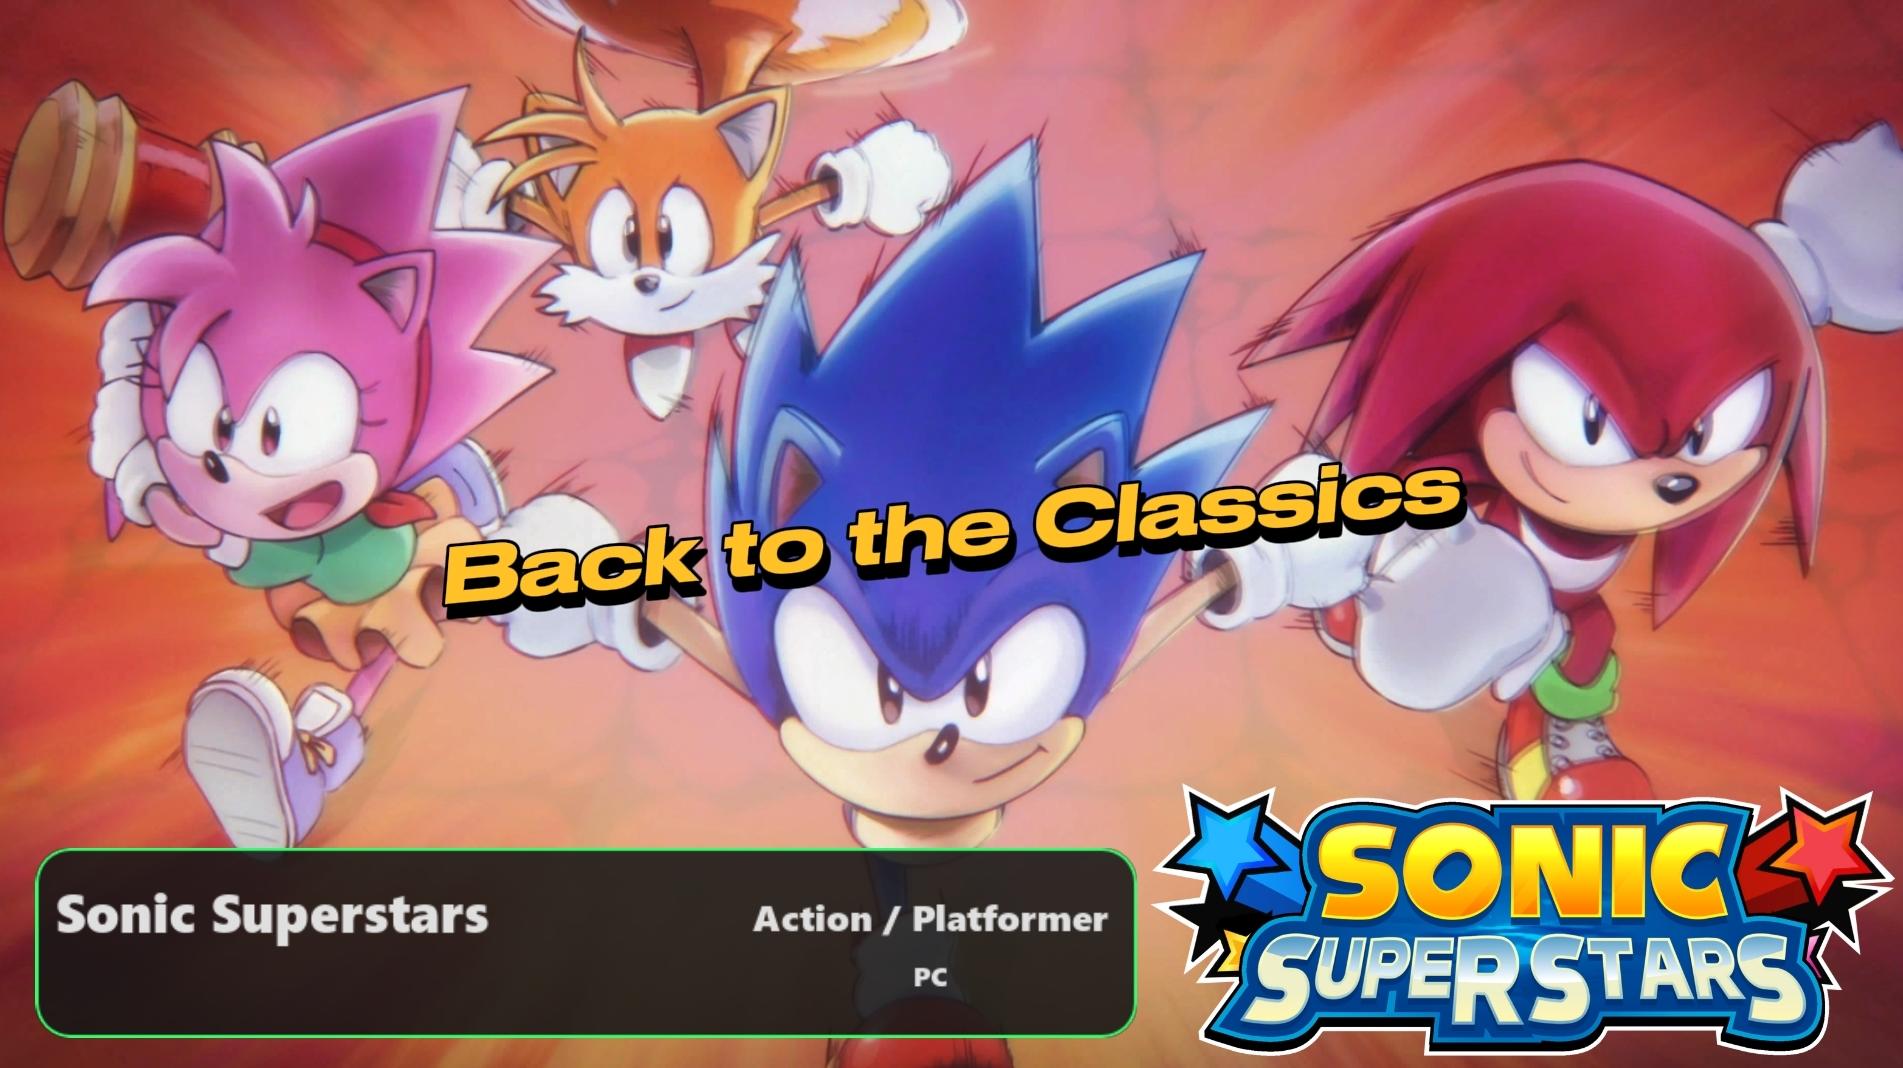 Sonic Superstars PC Requirements Are Now Out As the Game Is